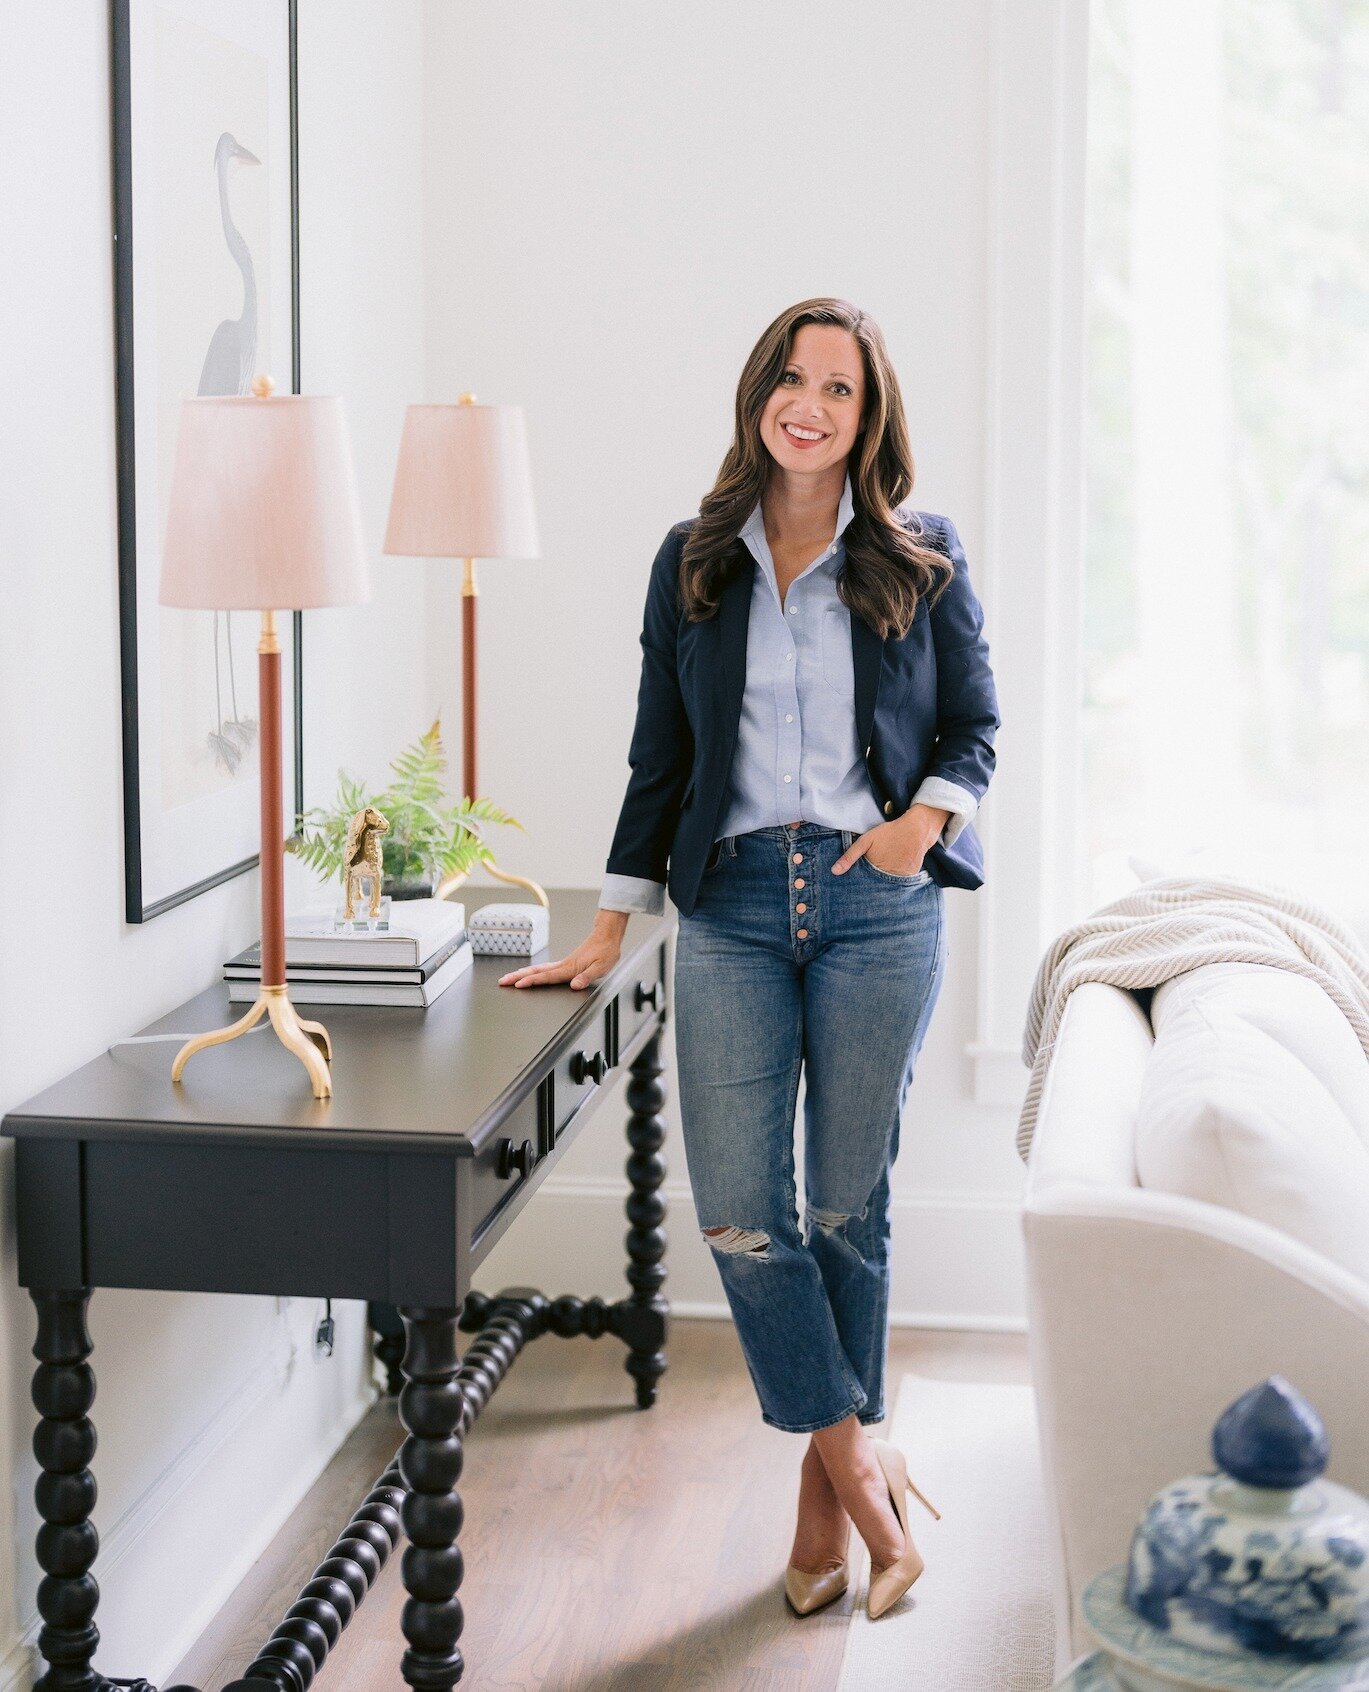 Psst... have you entered the GIVEAWAY with our sister brand @sweethomebyscd this week?! You could win a 1-hr virtual consultation with our founder and lead designer Sarah! Be sure to check out the post to enter! #sweethomebyscd #sarahcatherinedesign⁠